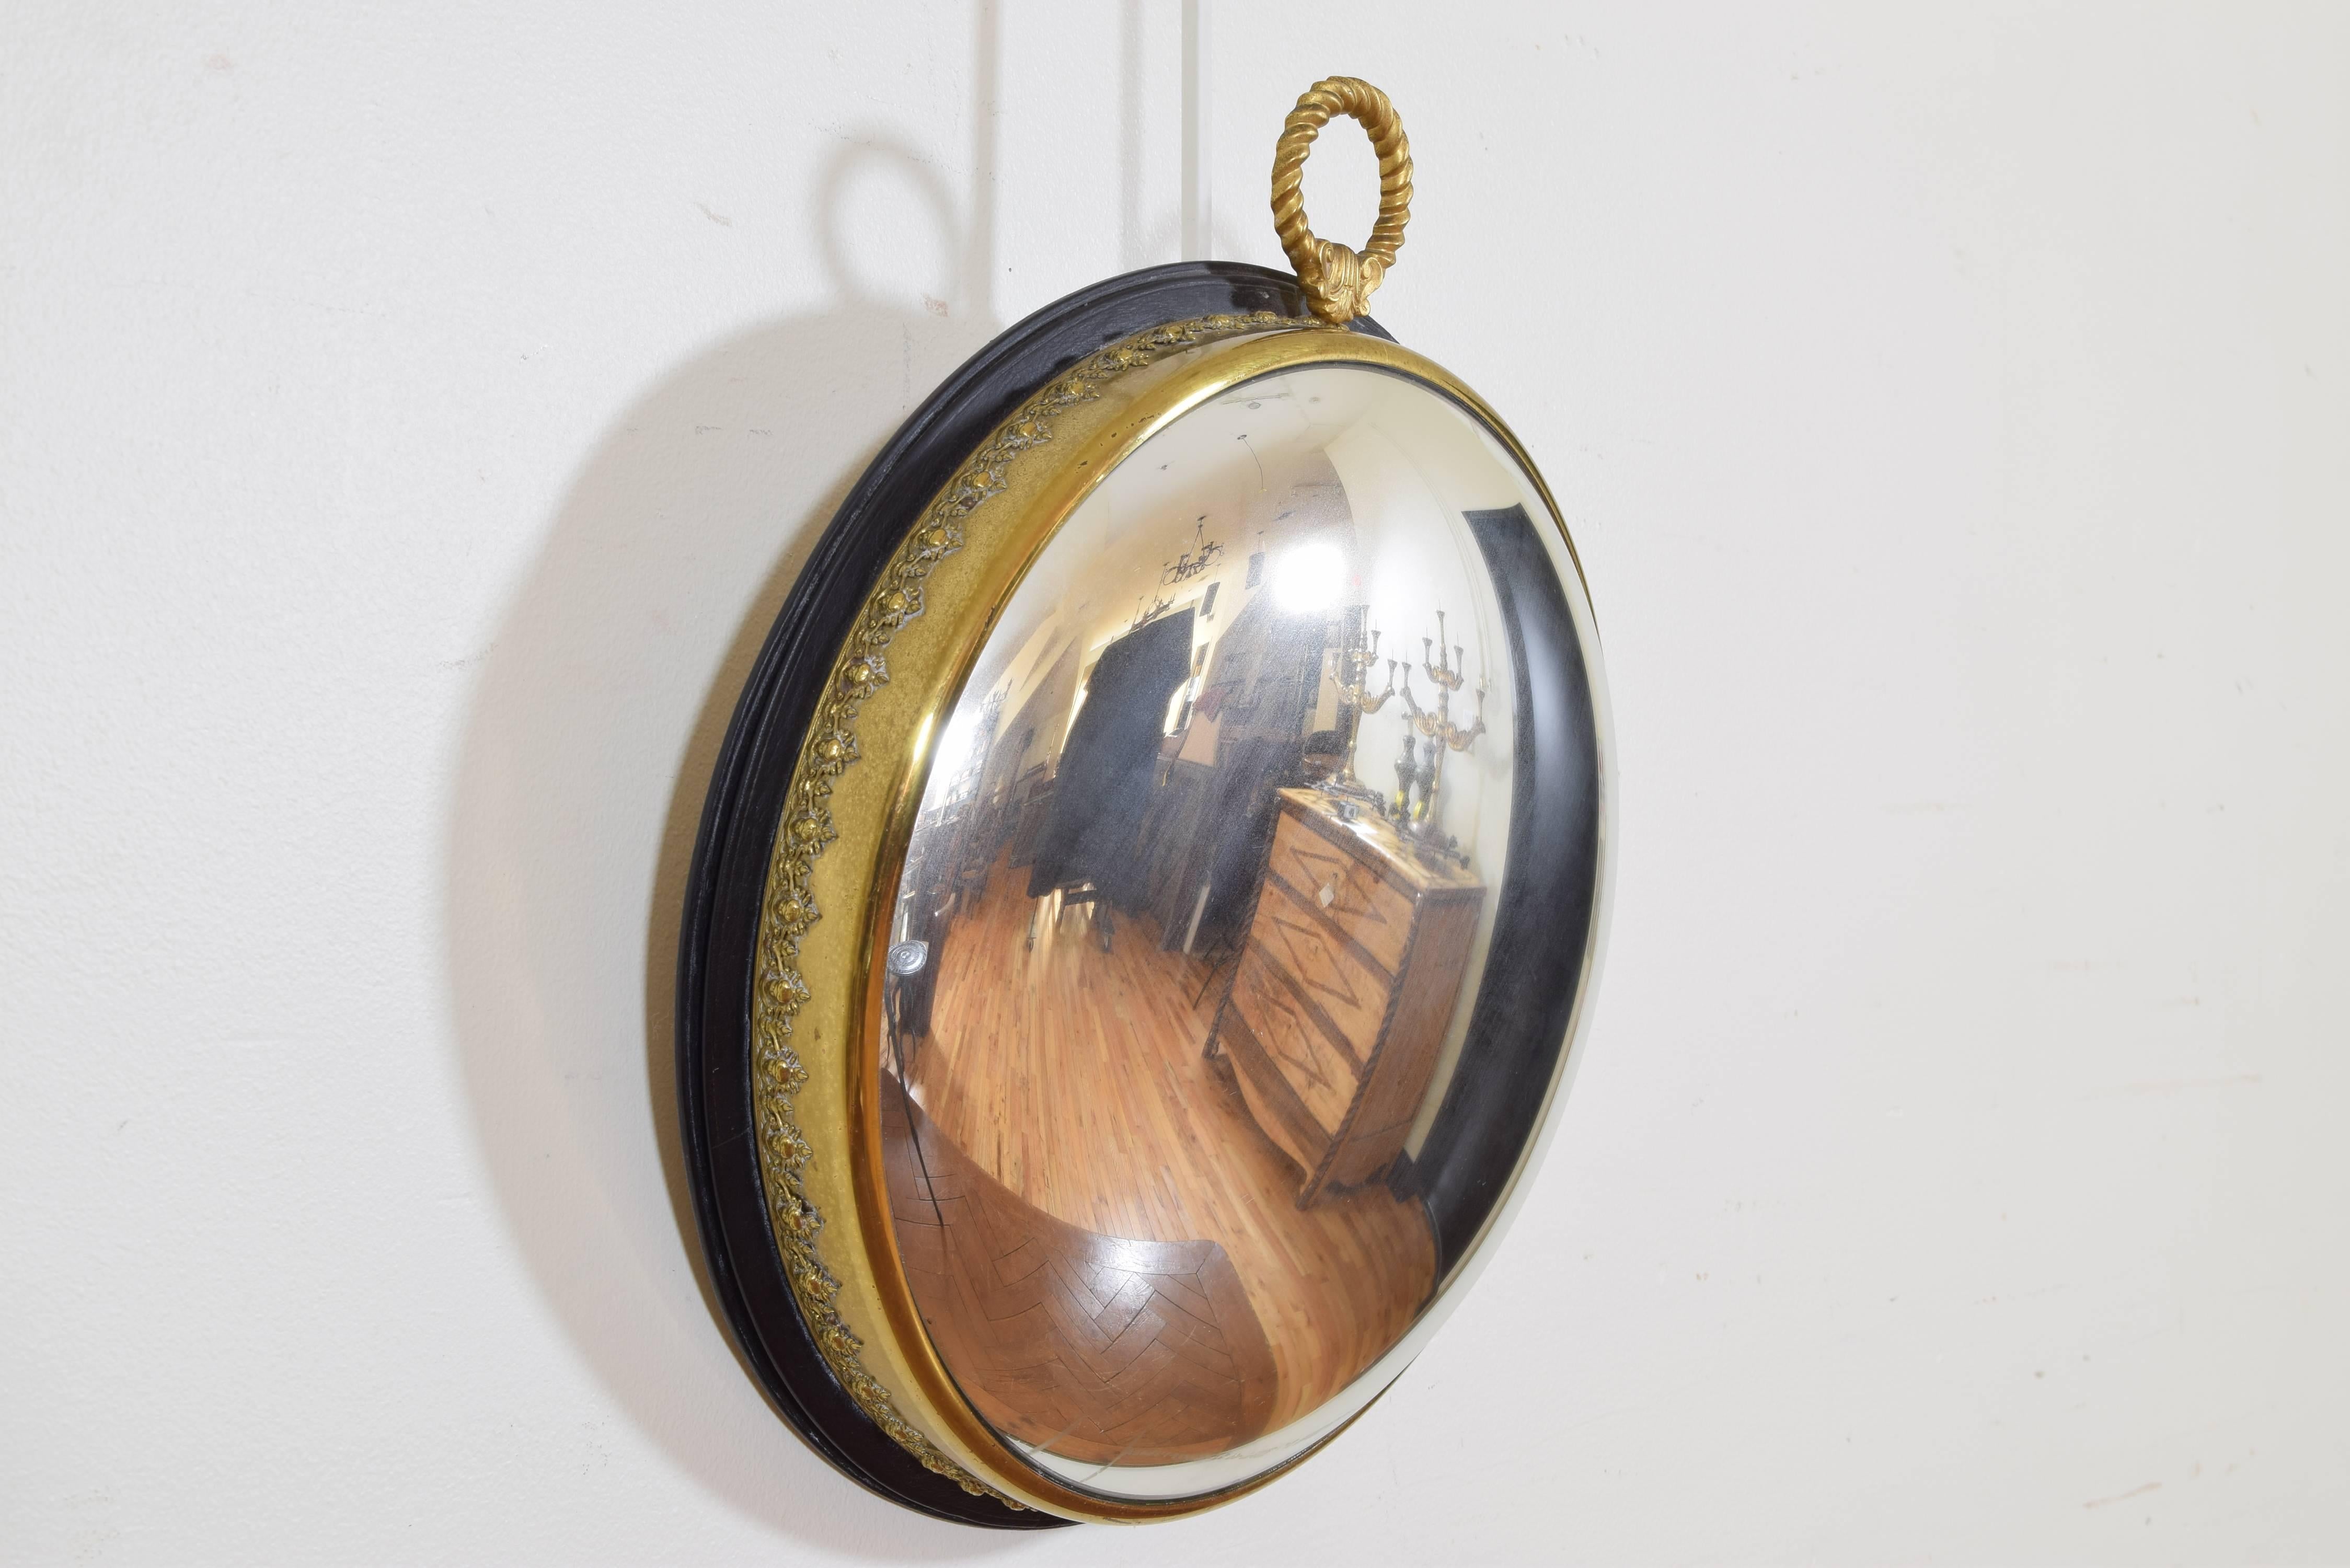 Made to resemble a pocket watch and having a cast brass gallery, retaining original convex mirrorplate.